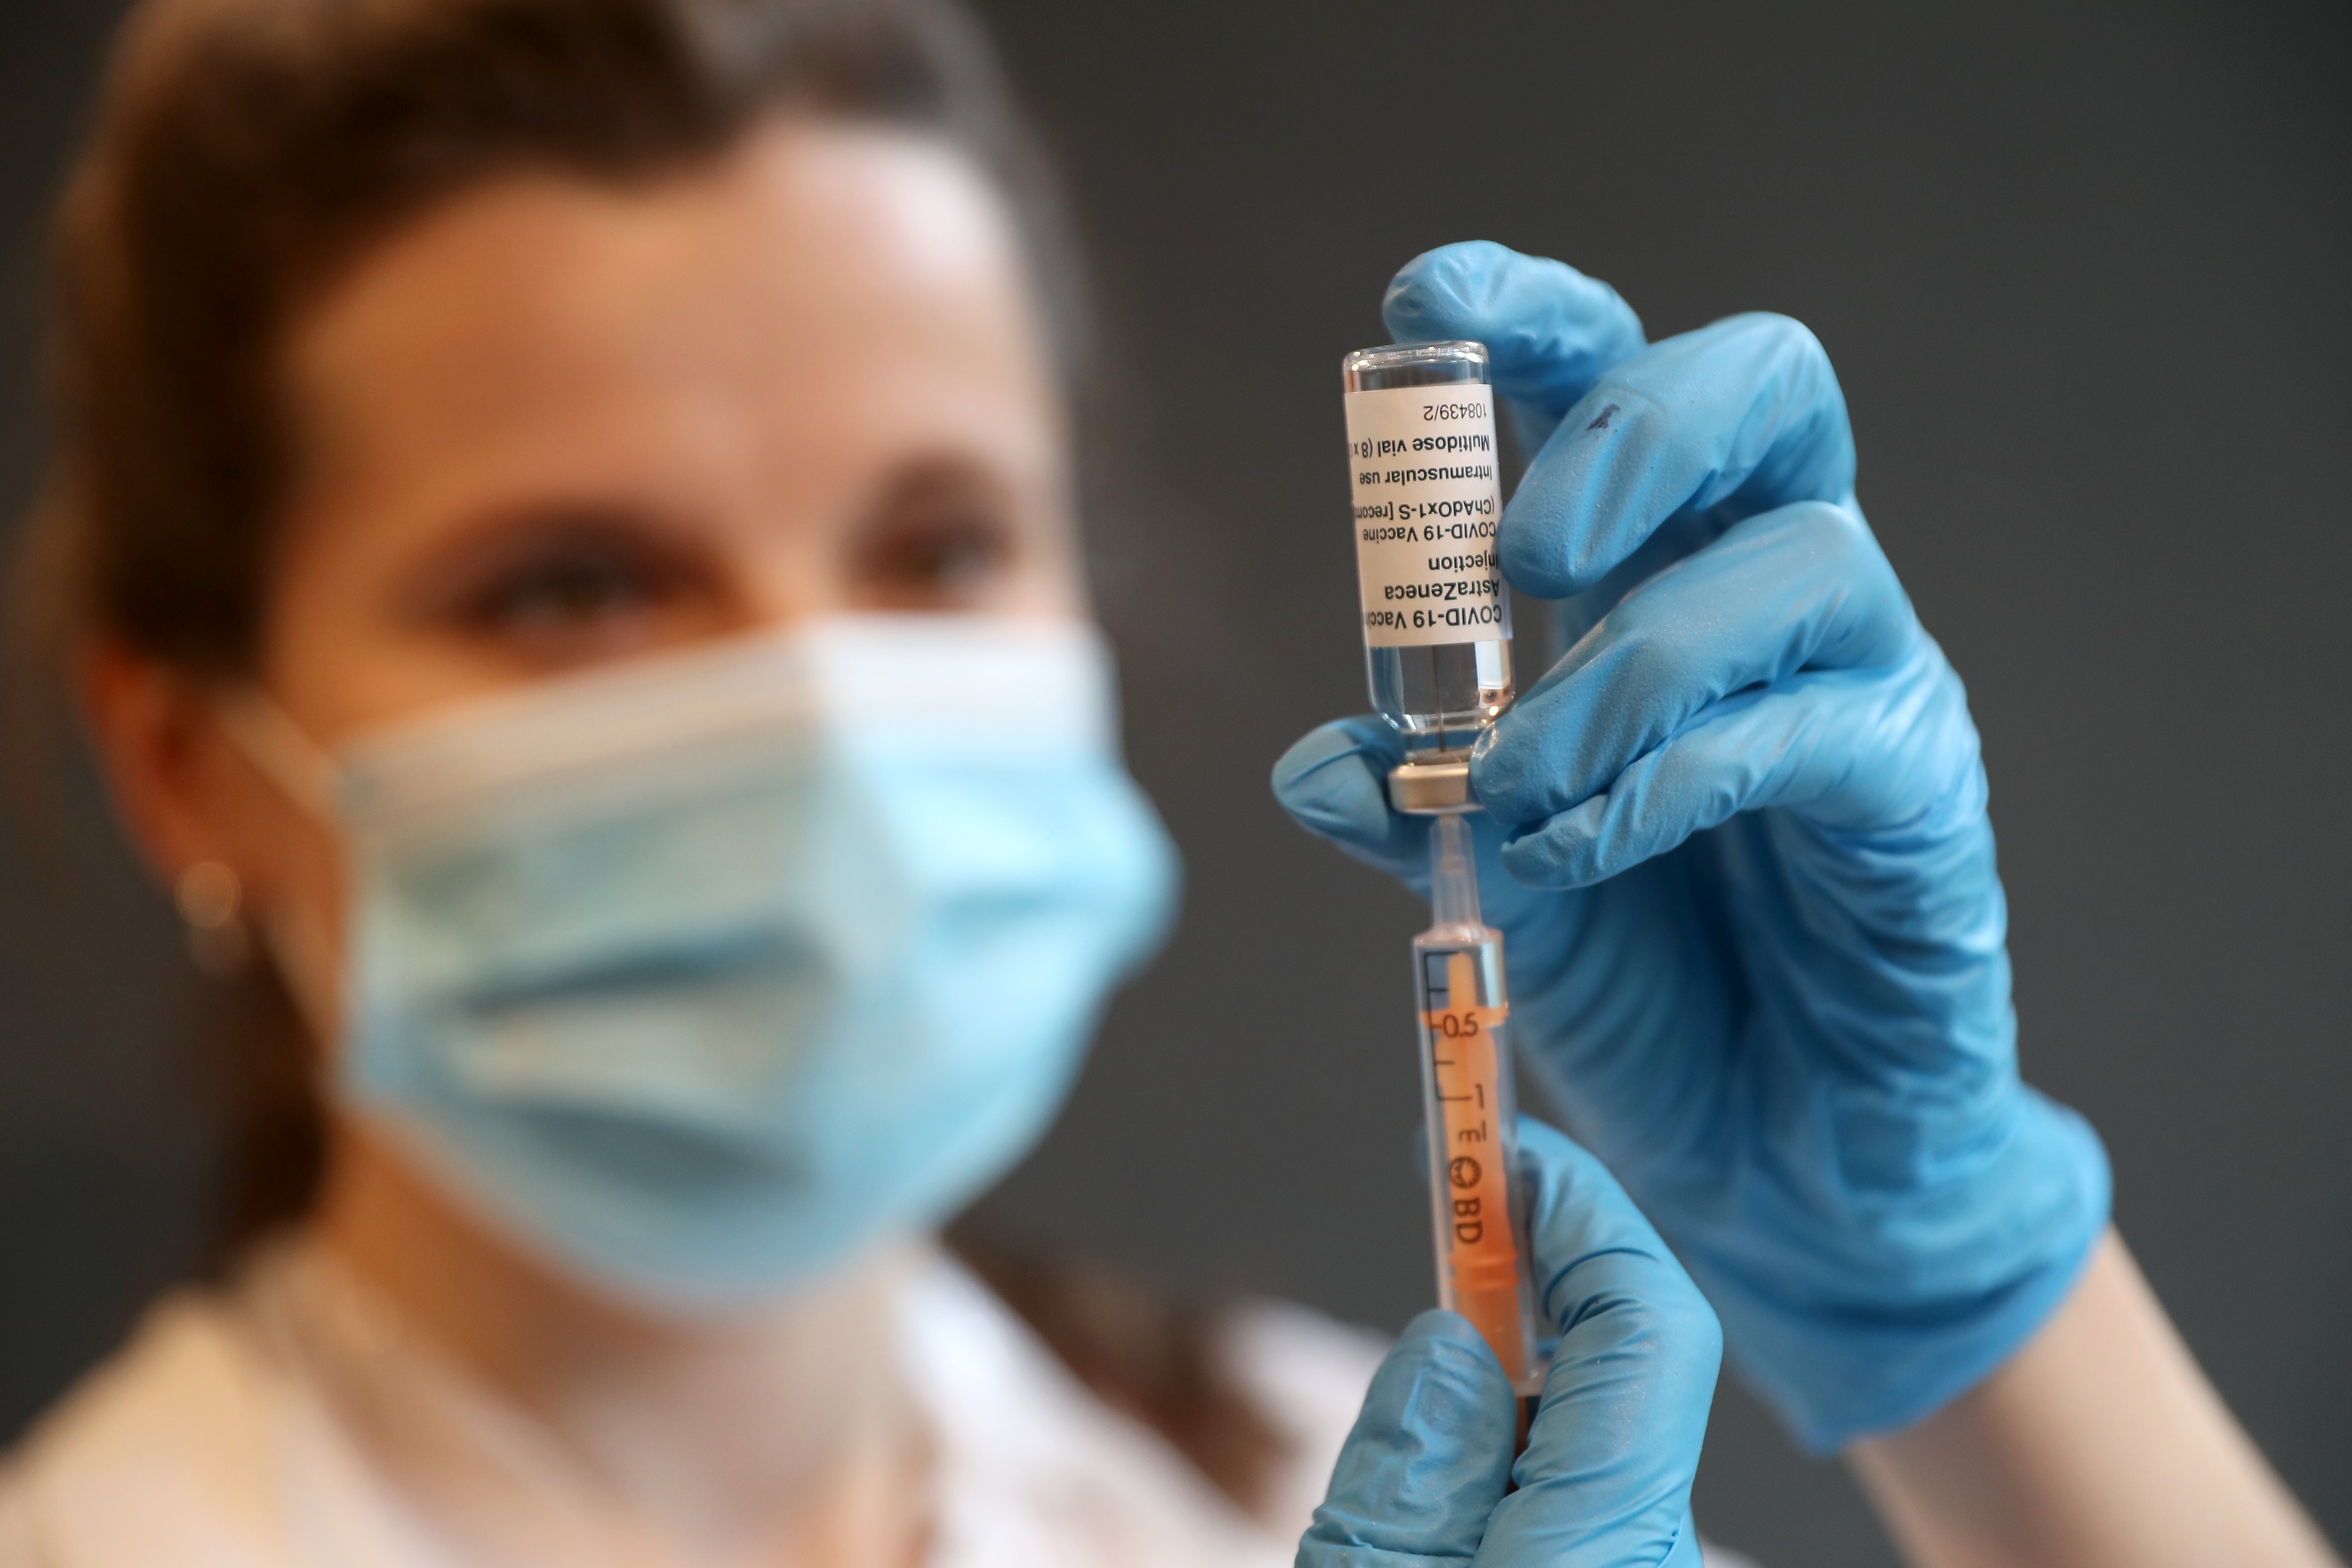 Only 7 per cent of students said they’d not received a Covid vaccine